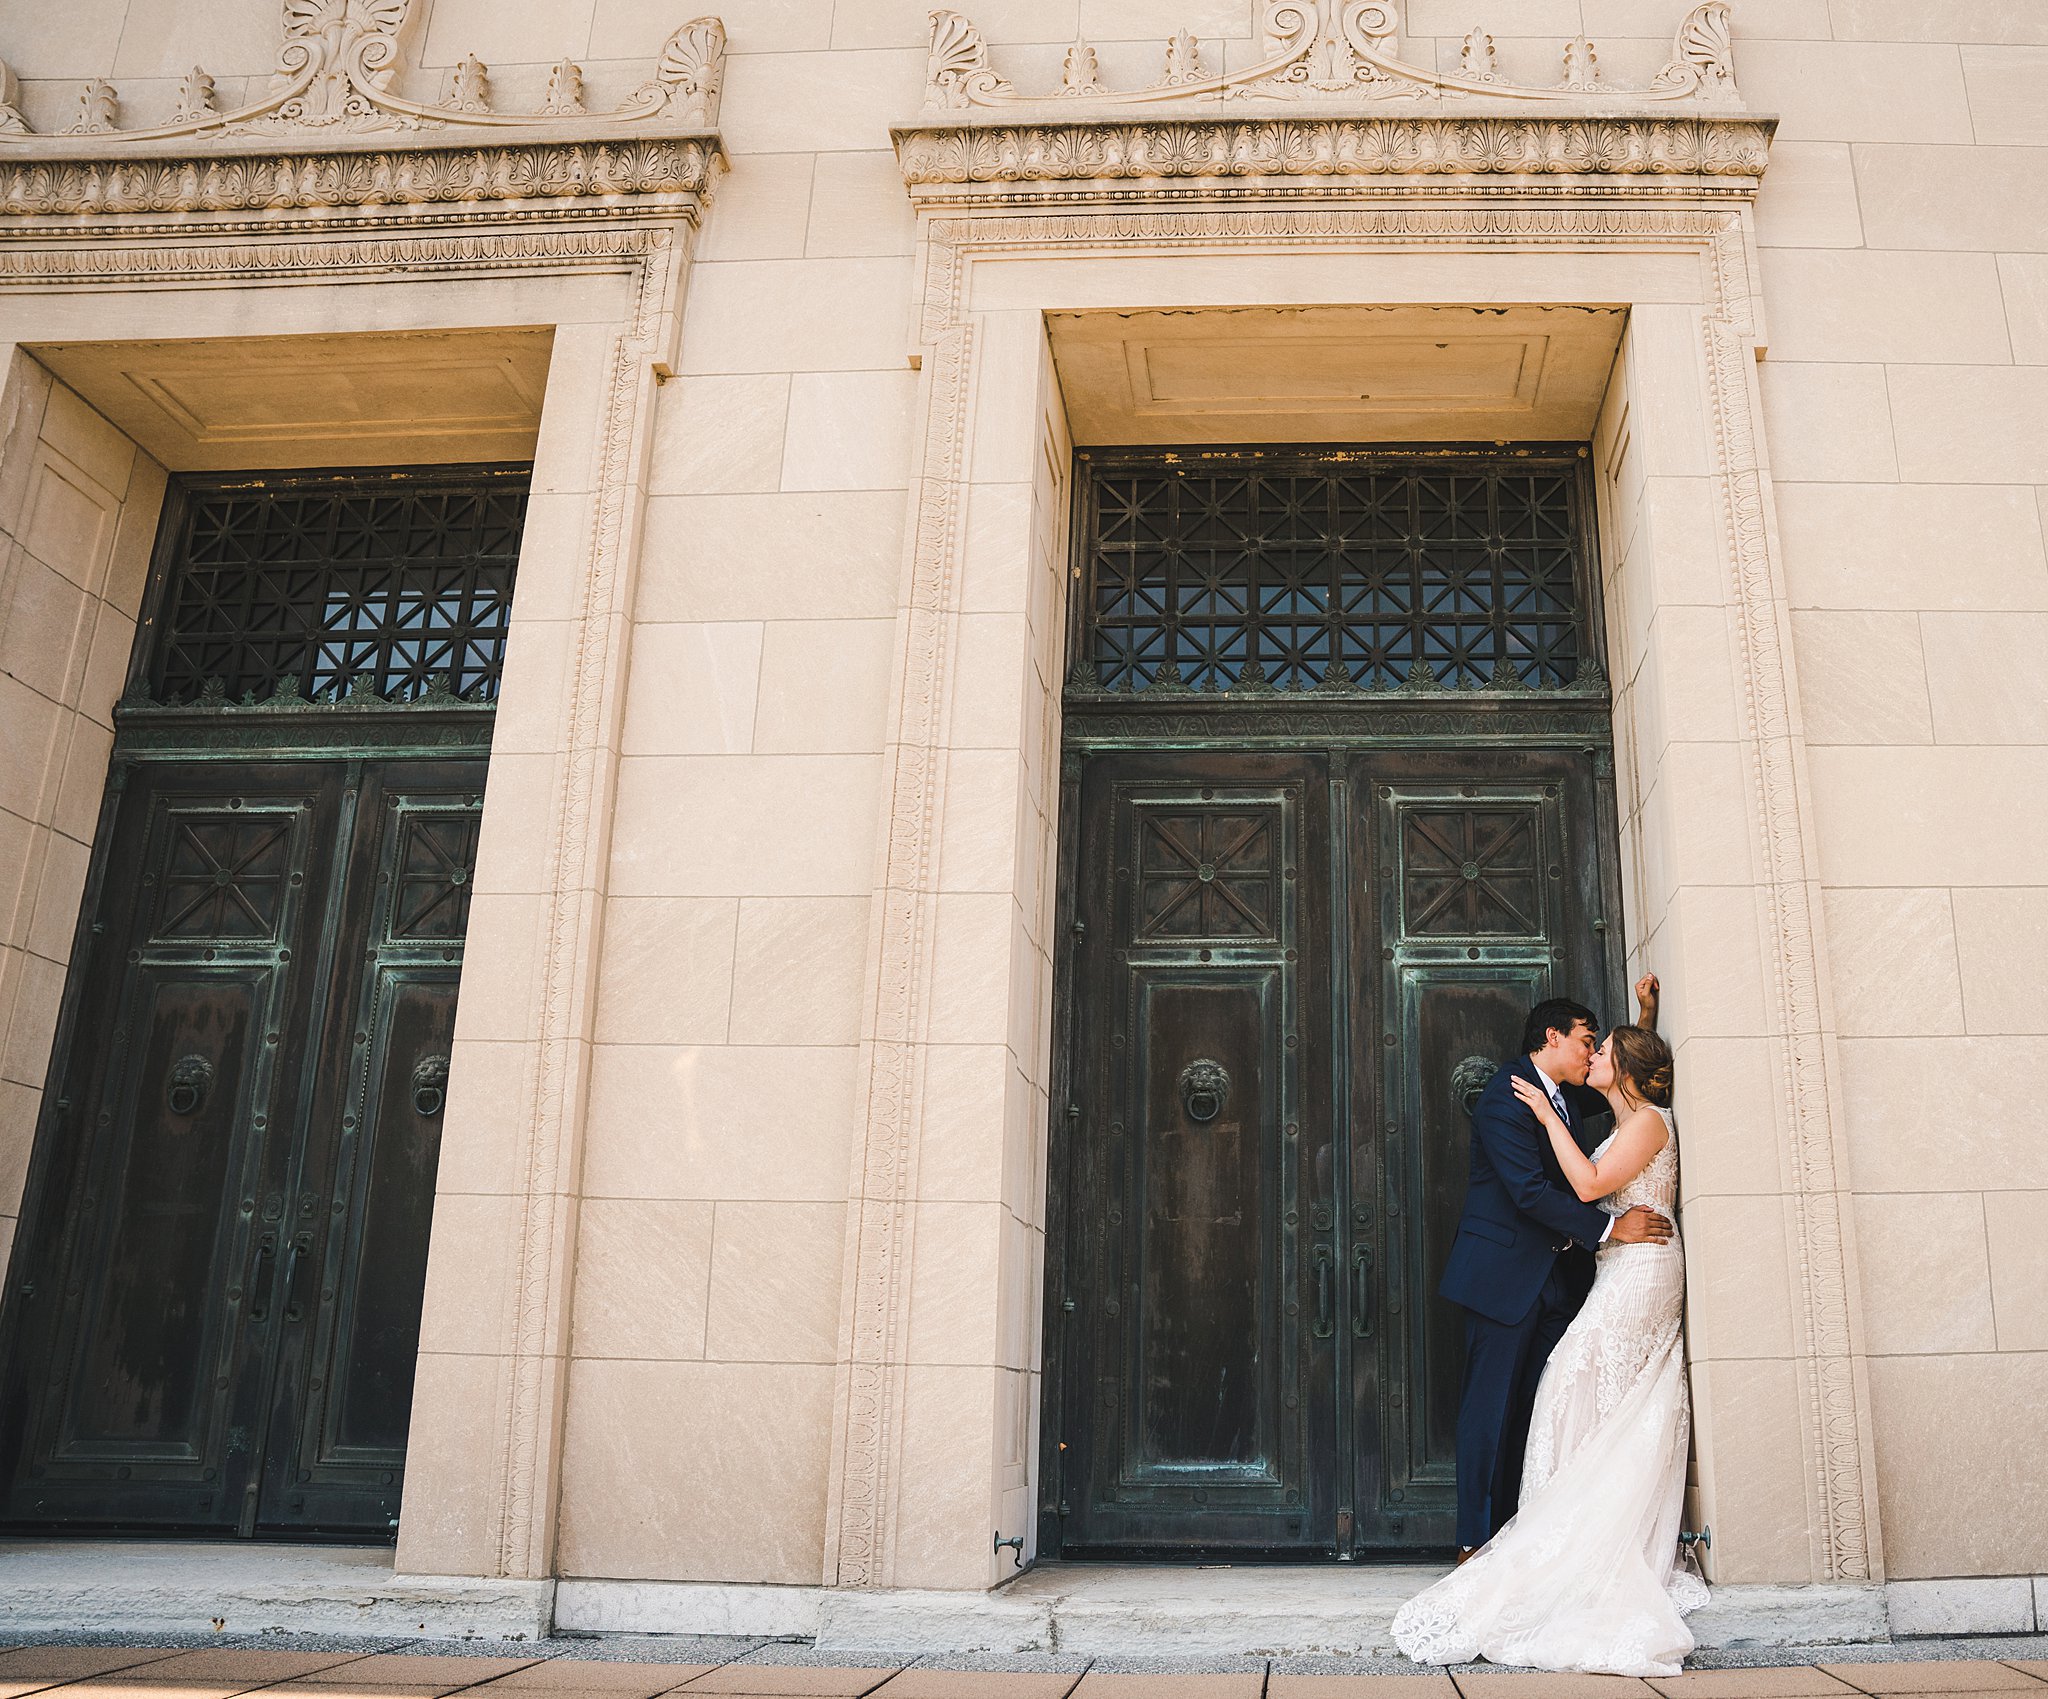 Newlyweds kiss in a large doorway of an ornate stone building unique wedding venues dayton ohio